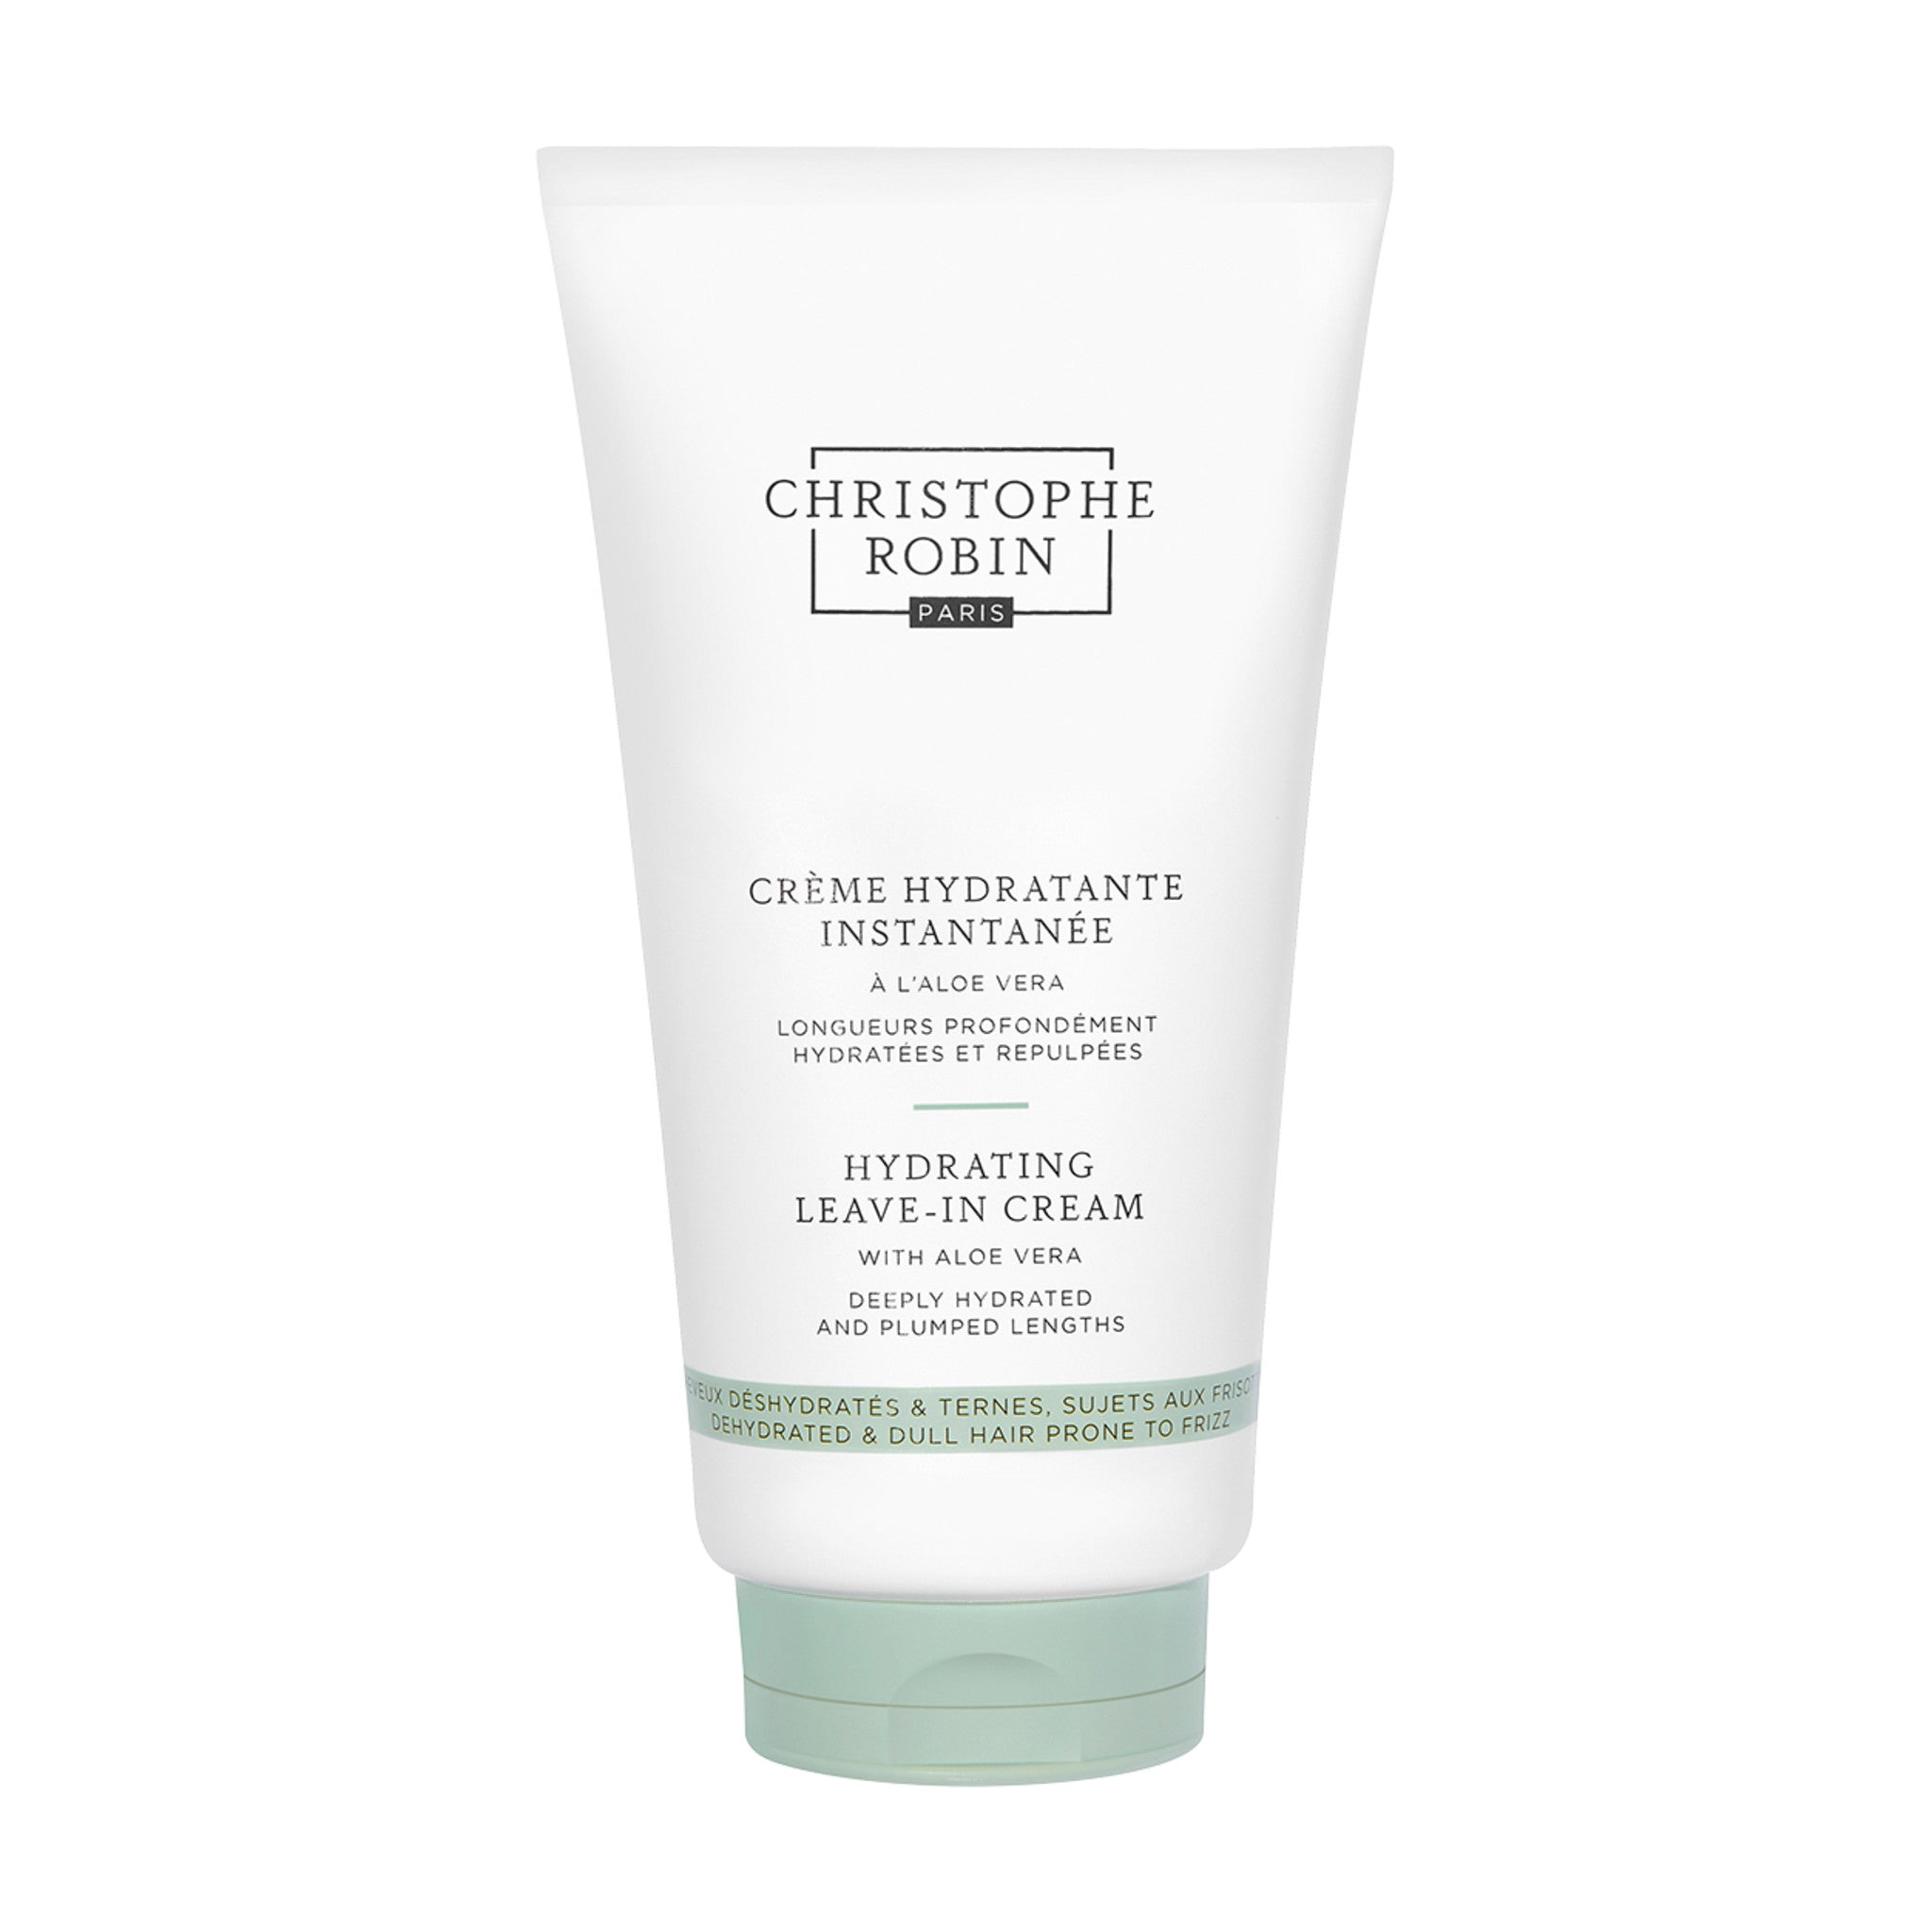 Christophe Robin Hydrating Leave-In Cream main image.